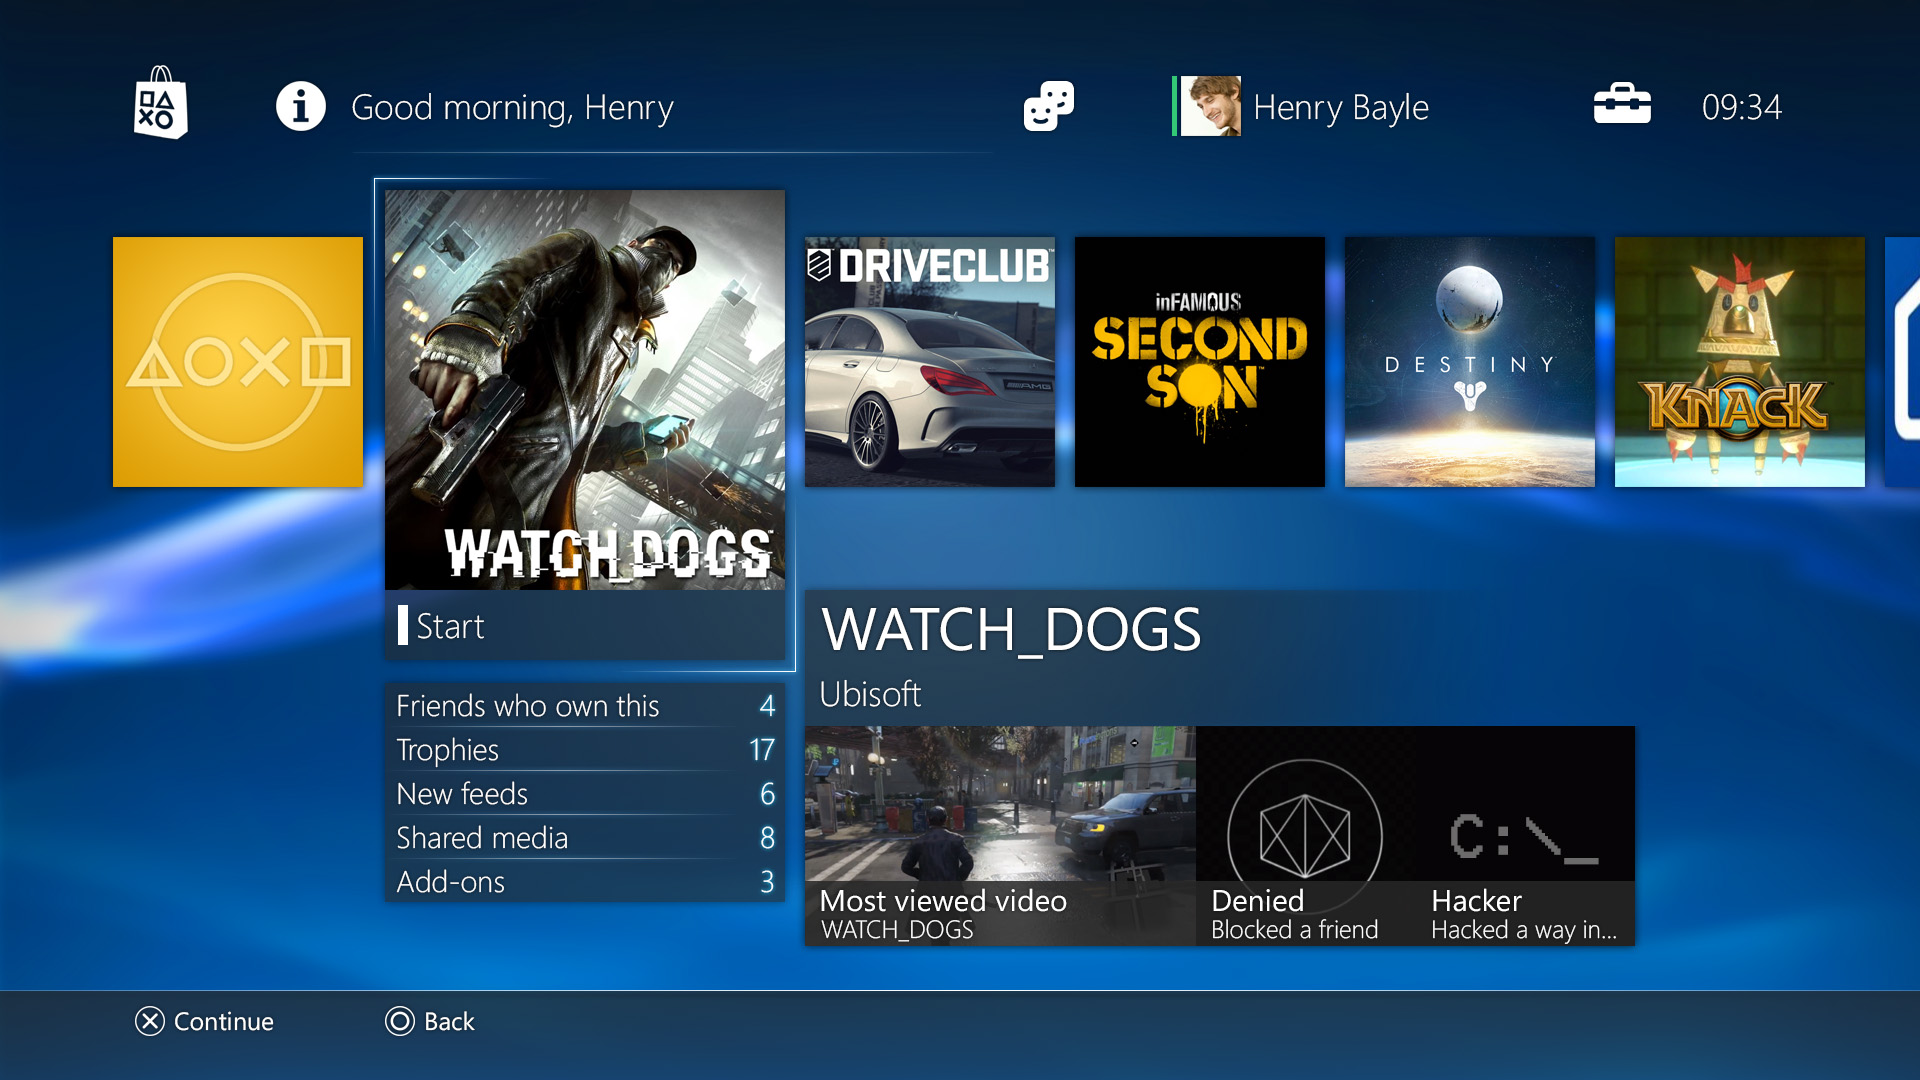  you wont be able to customize your own wallpaper on the PS4